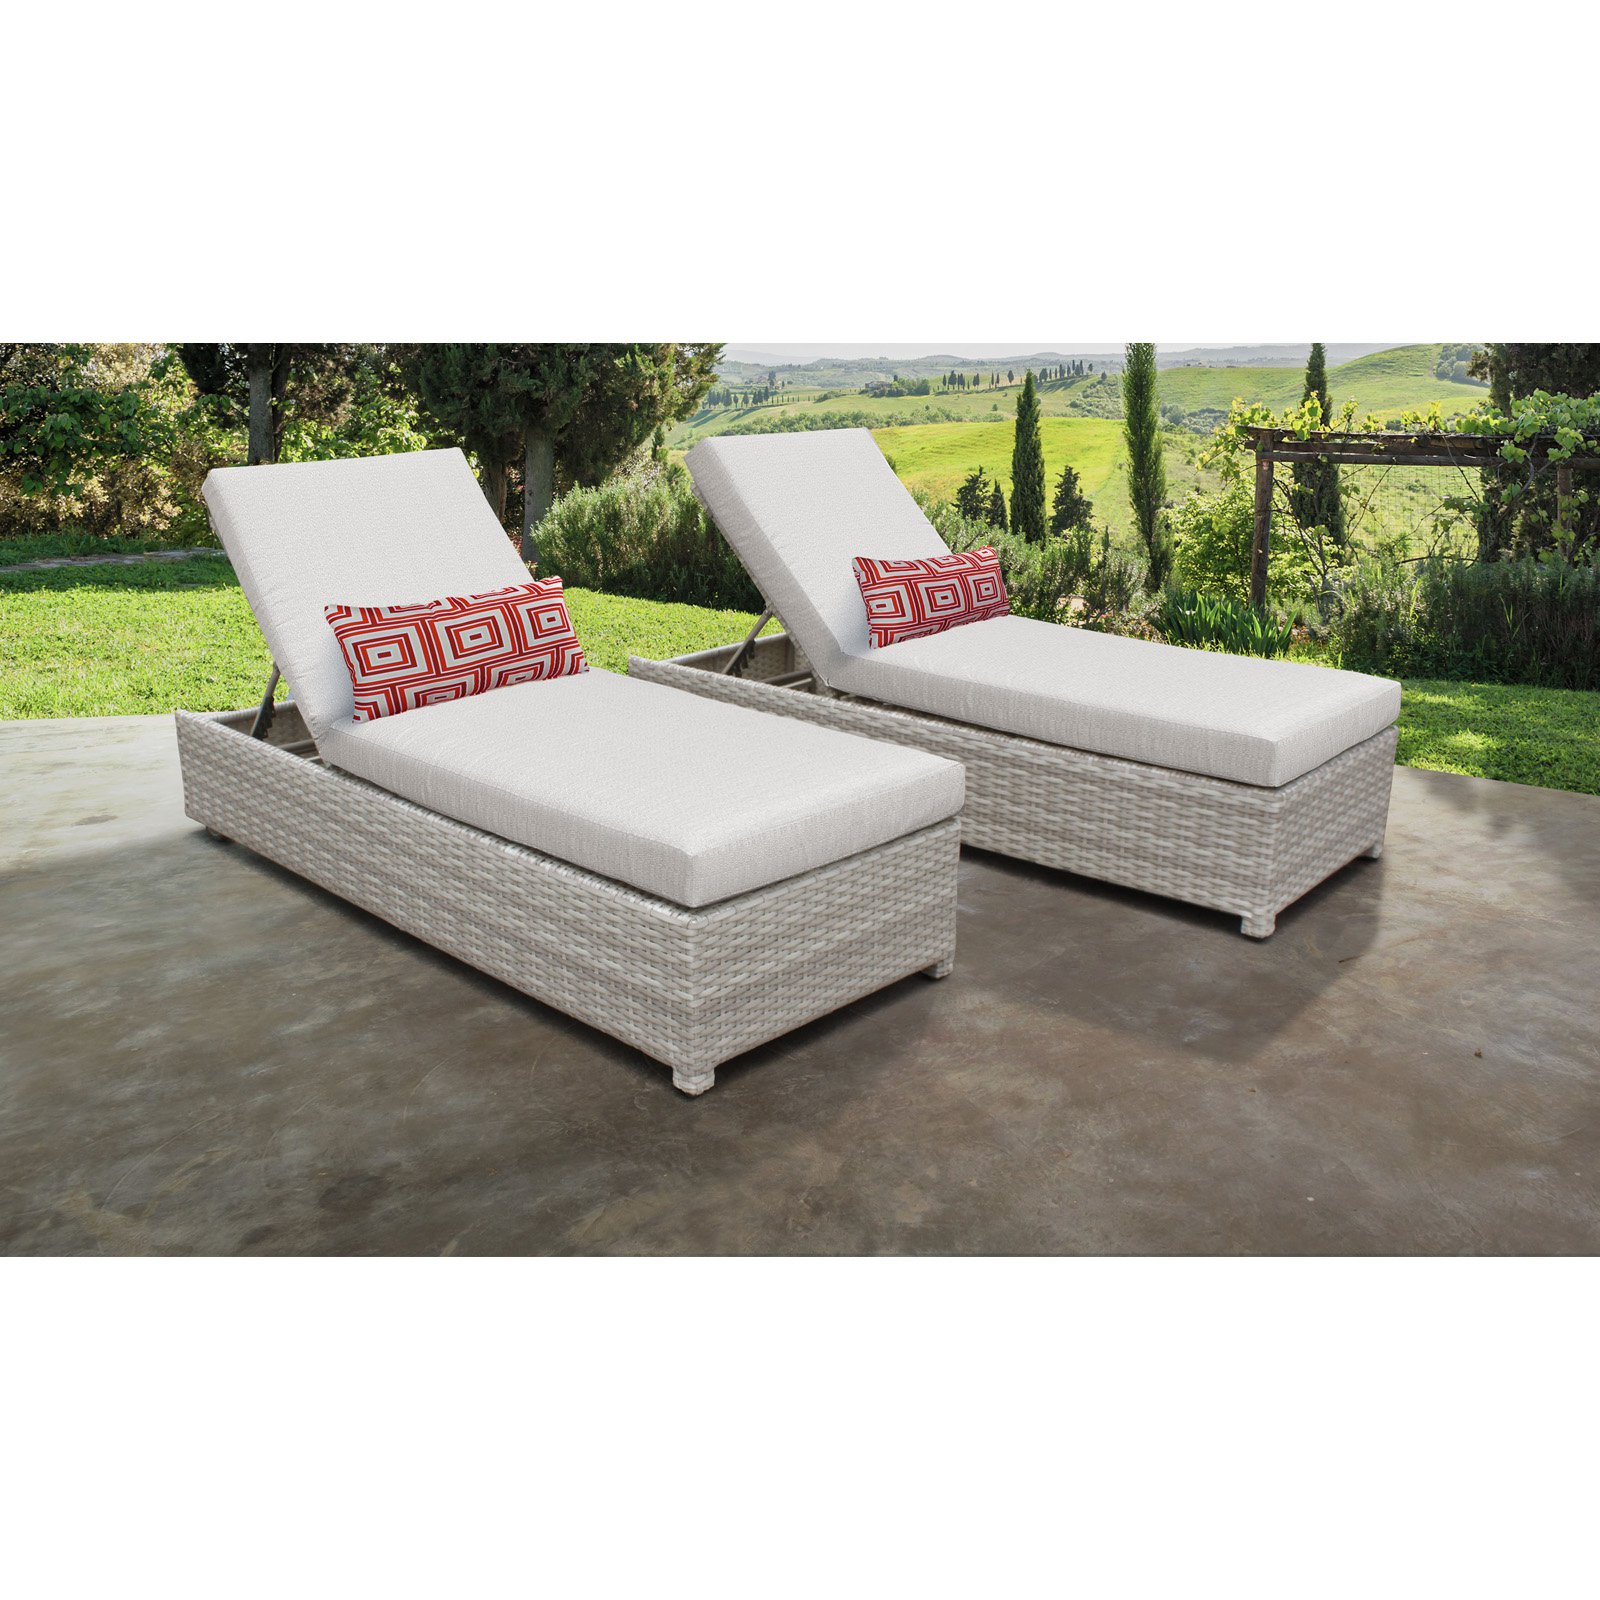 TK Classics Fairmont Wheeled Wicker Outdoor Chaise Lounge Chair - Set of 2 - image 5 of 11